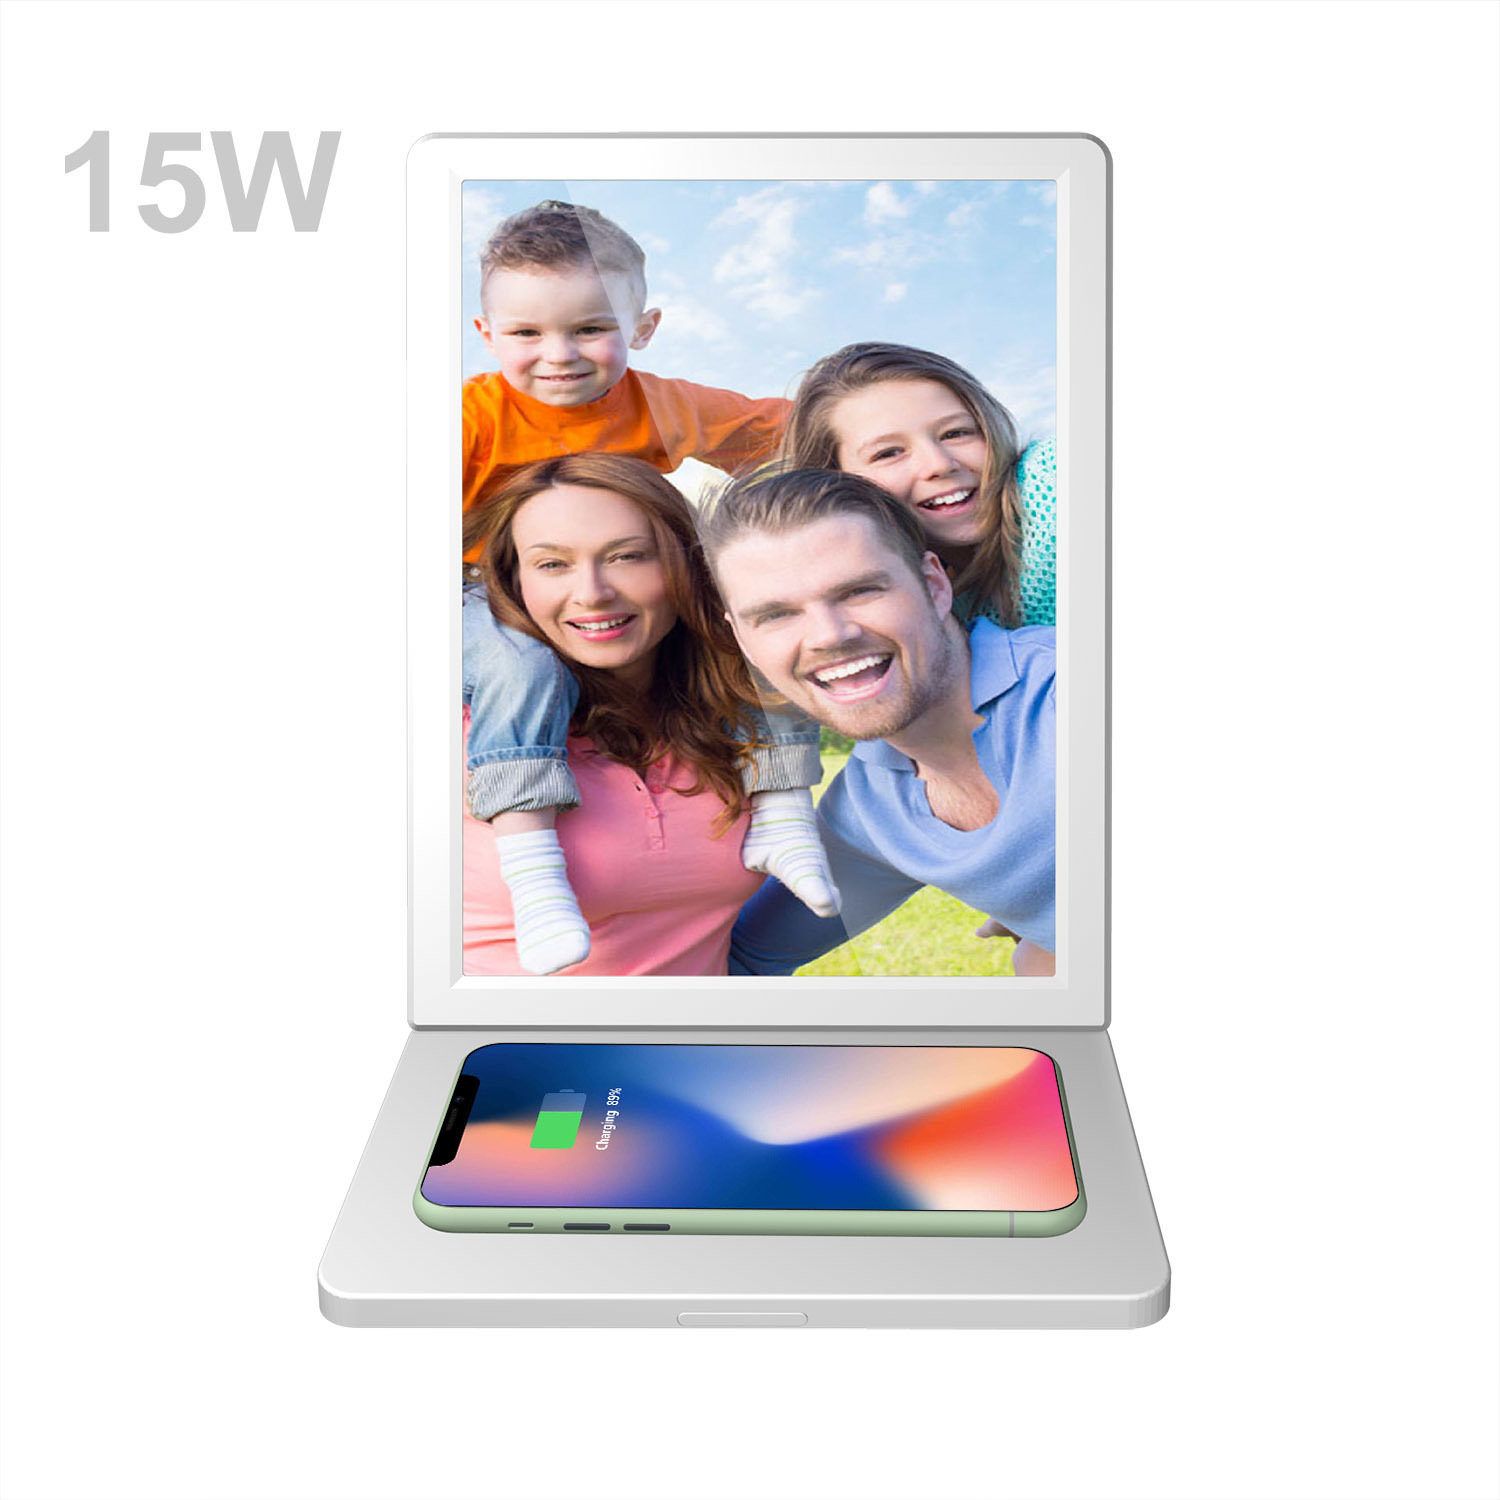 High Quality 15w Fast Wireless Charger - Digital Signage with Wireless Fast Charger 15W digital photo frame 9.7inch IPS FHD Touch Screen Wifi Battery Operated LCD Player – Idealway